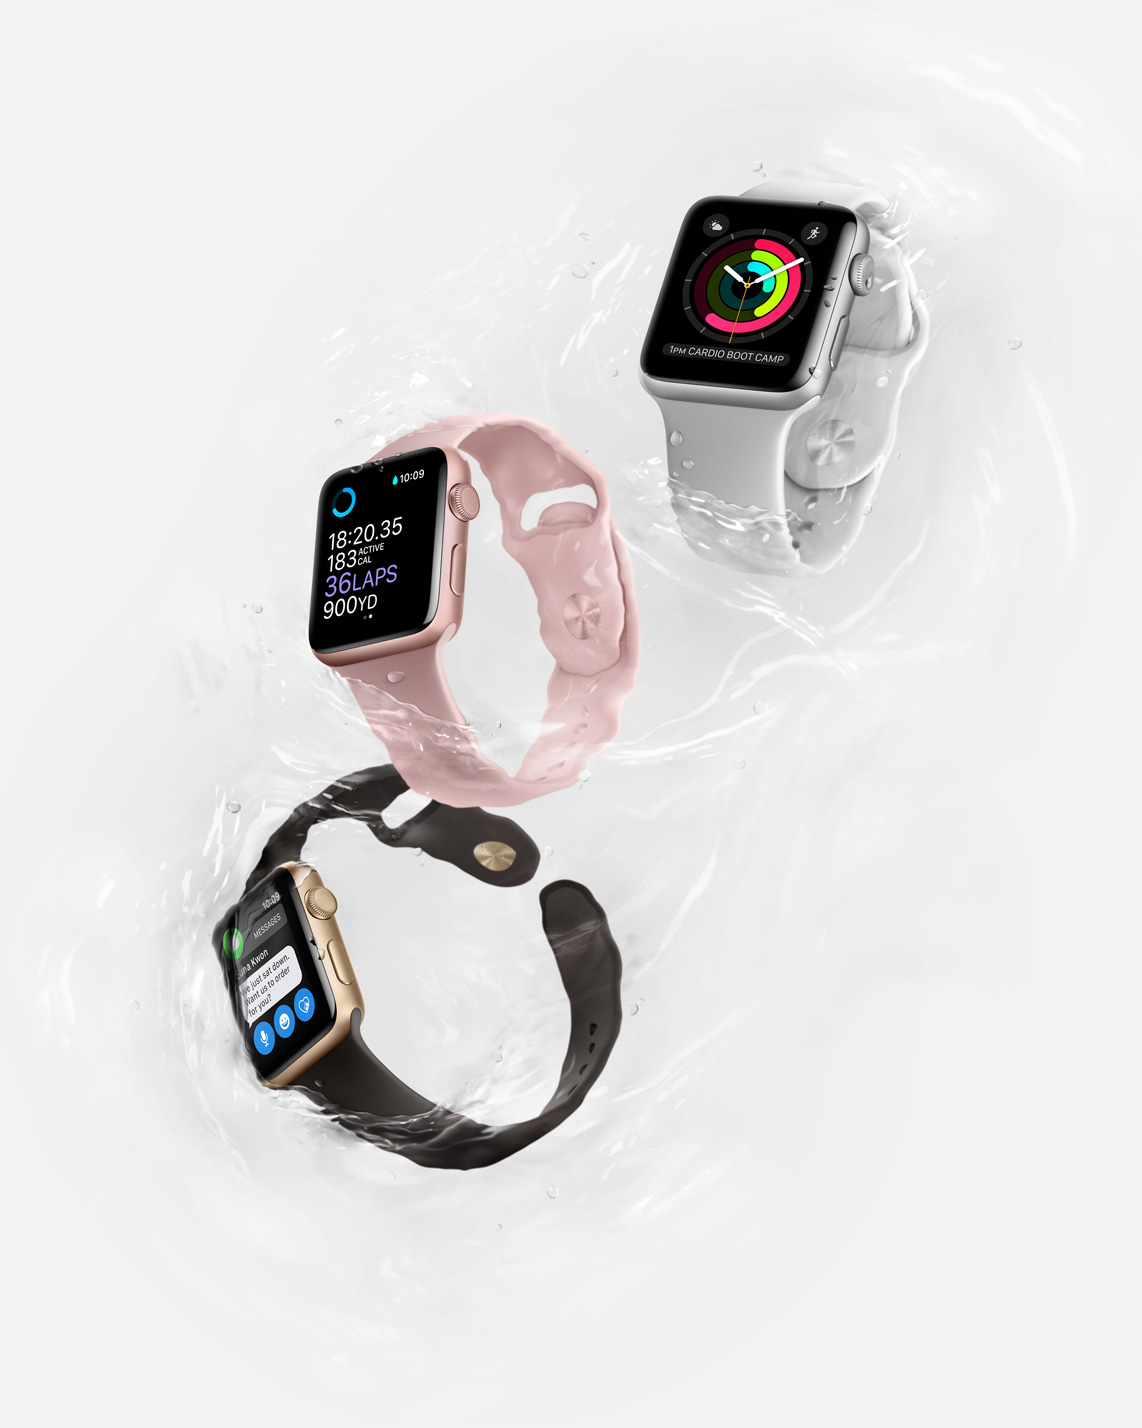 Apple Introduces Apple Watch Series 2, The Ultimate Device for a Healthy Life_4